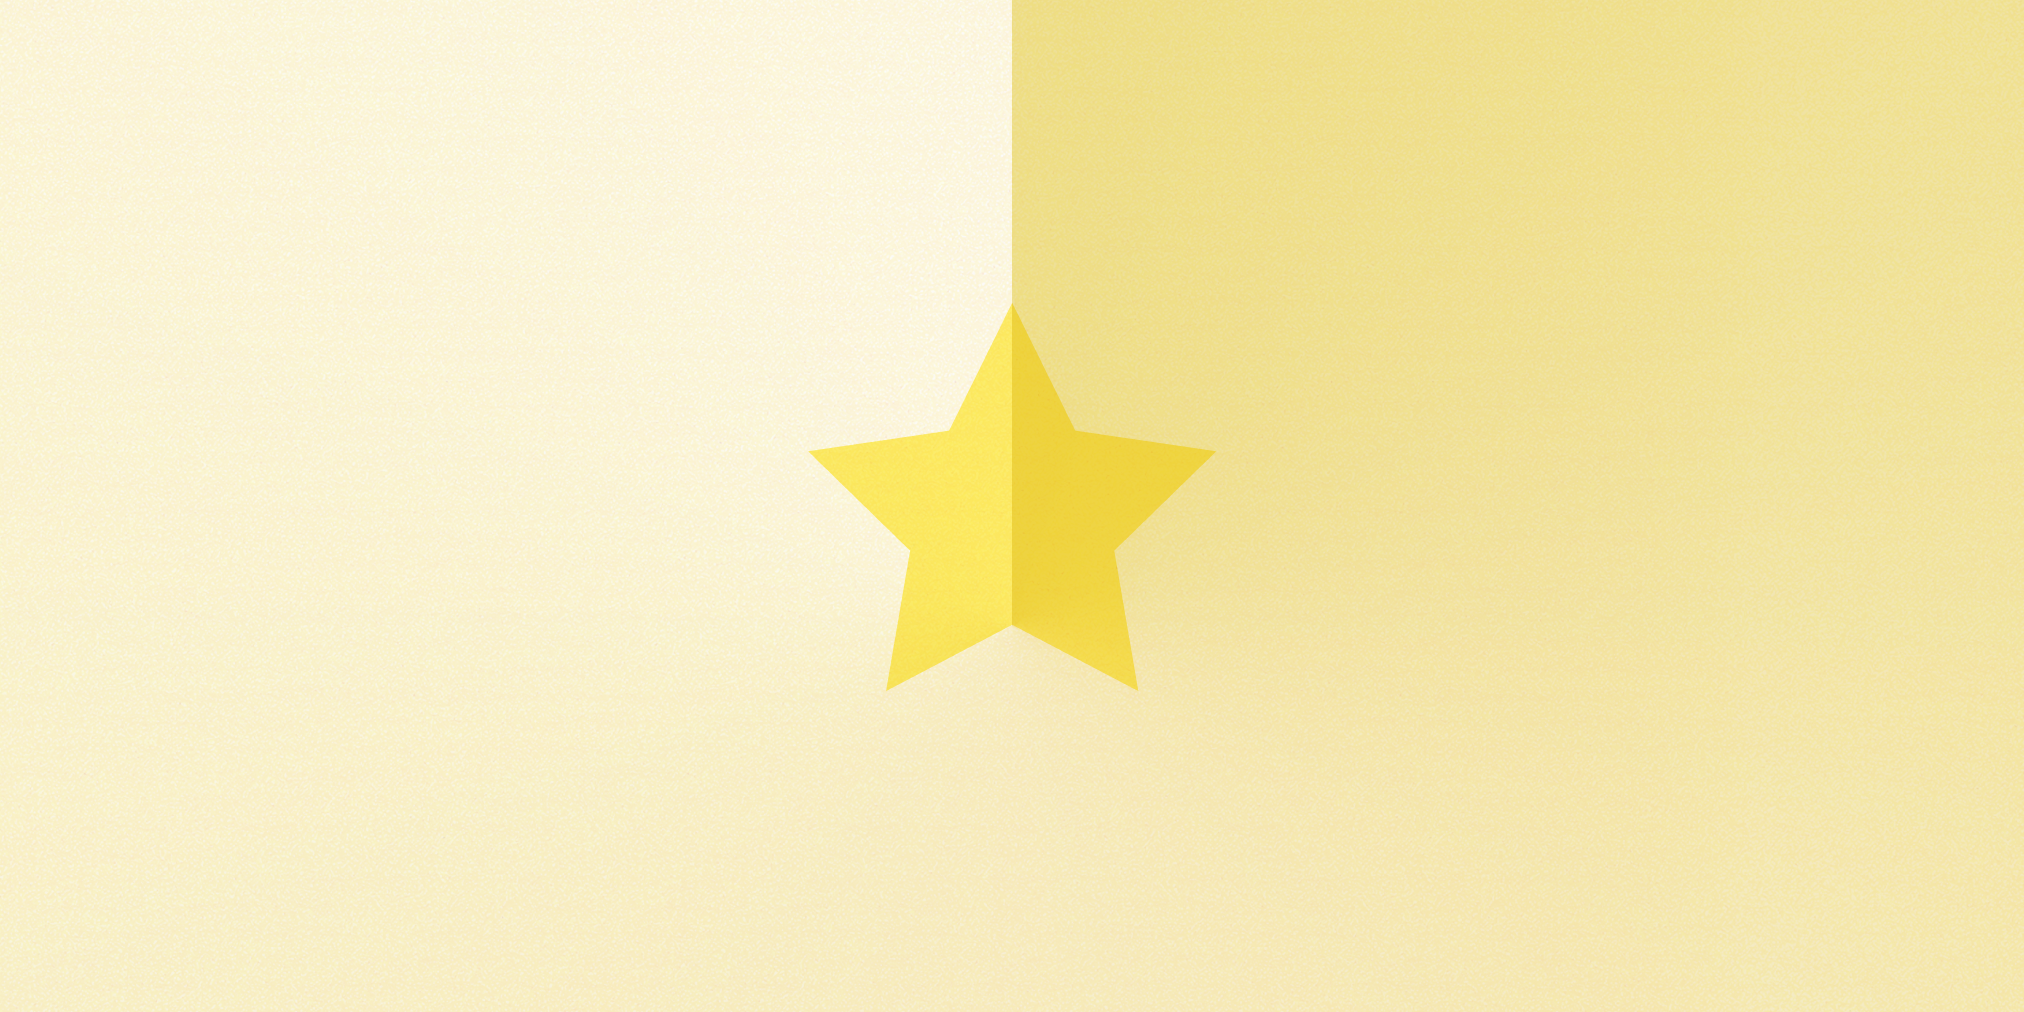 Fractional SVG stars with CSS